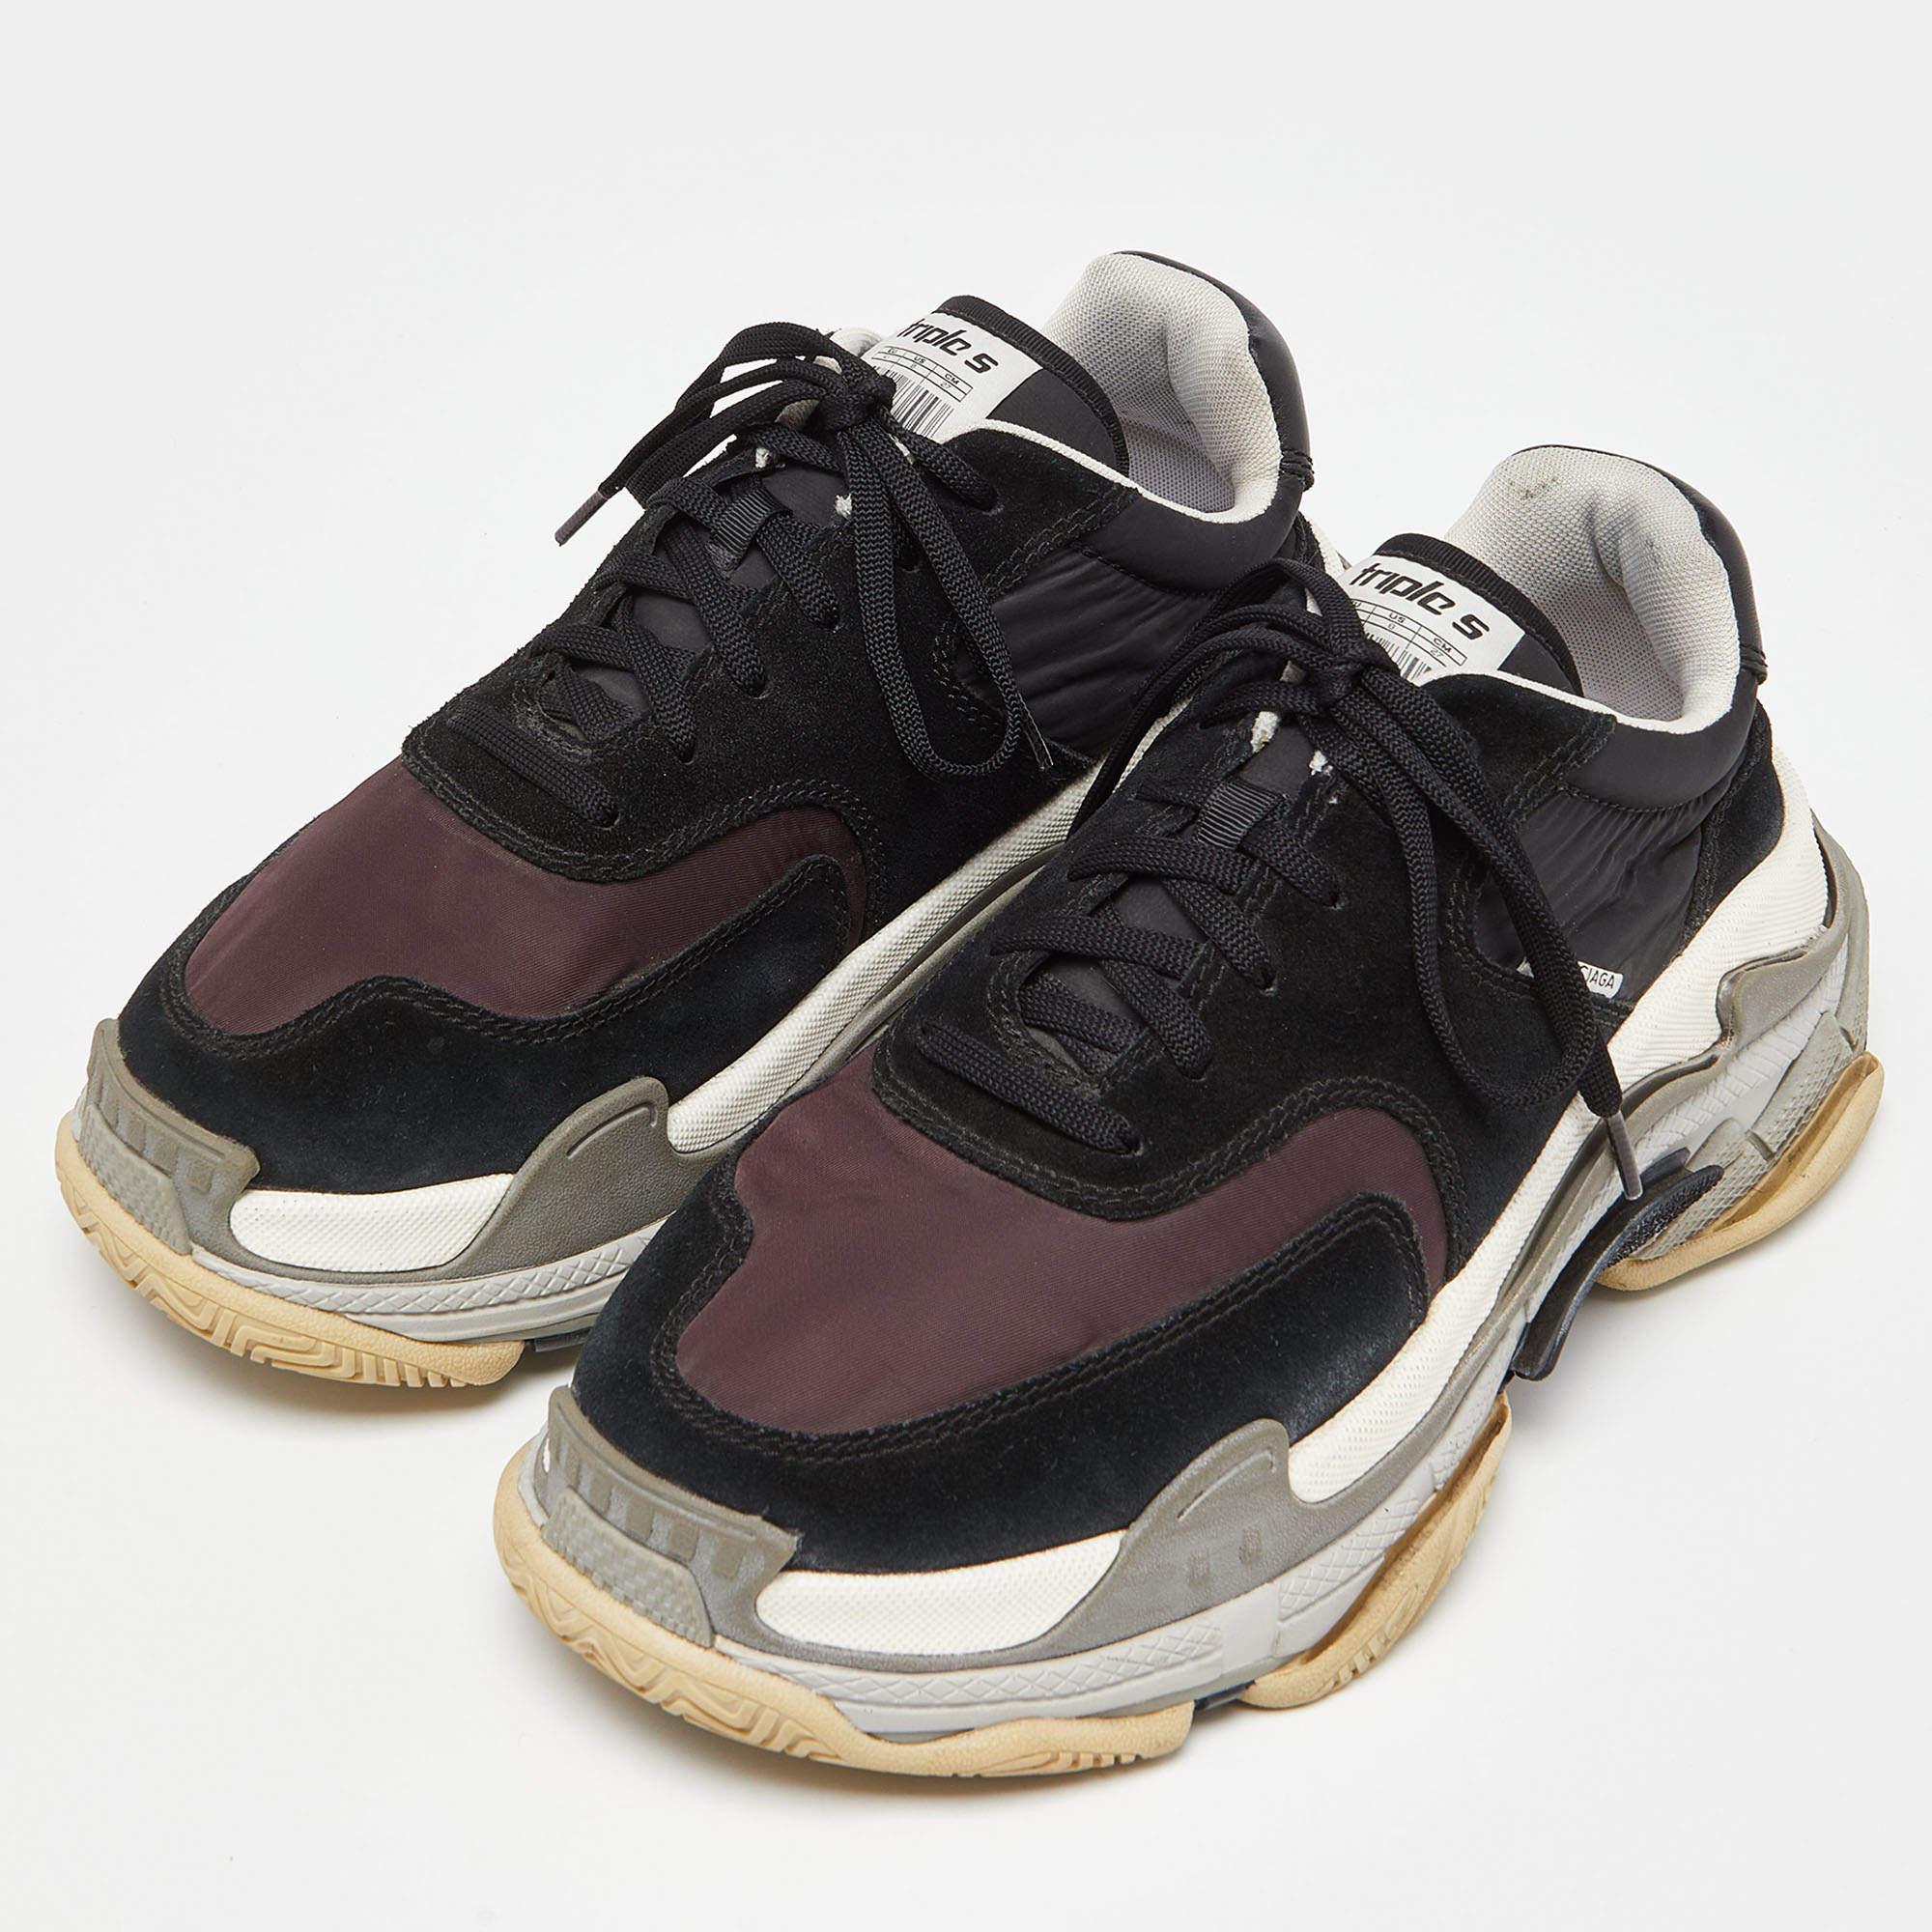 Balenciaga Black/Burgundy Suede and Nylon Triple S Sneakers Size 41 For Sale 2